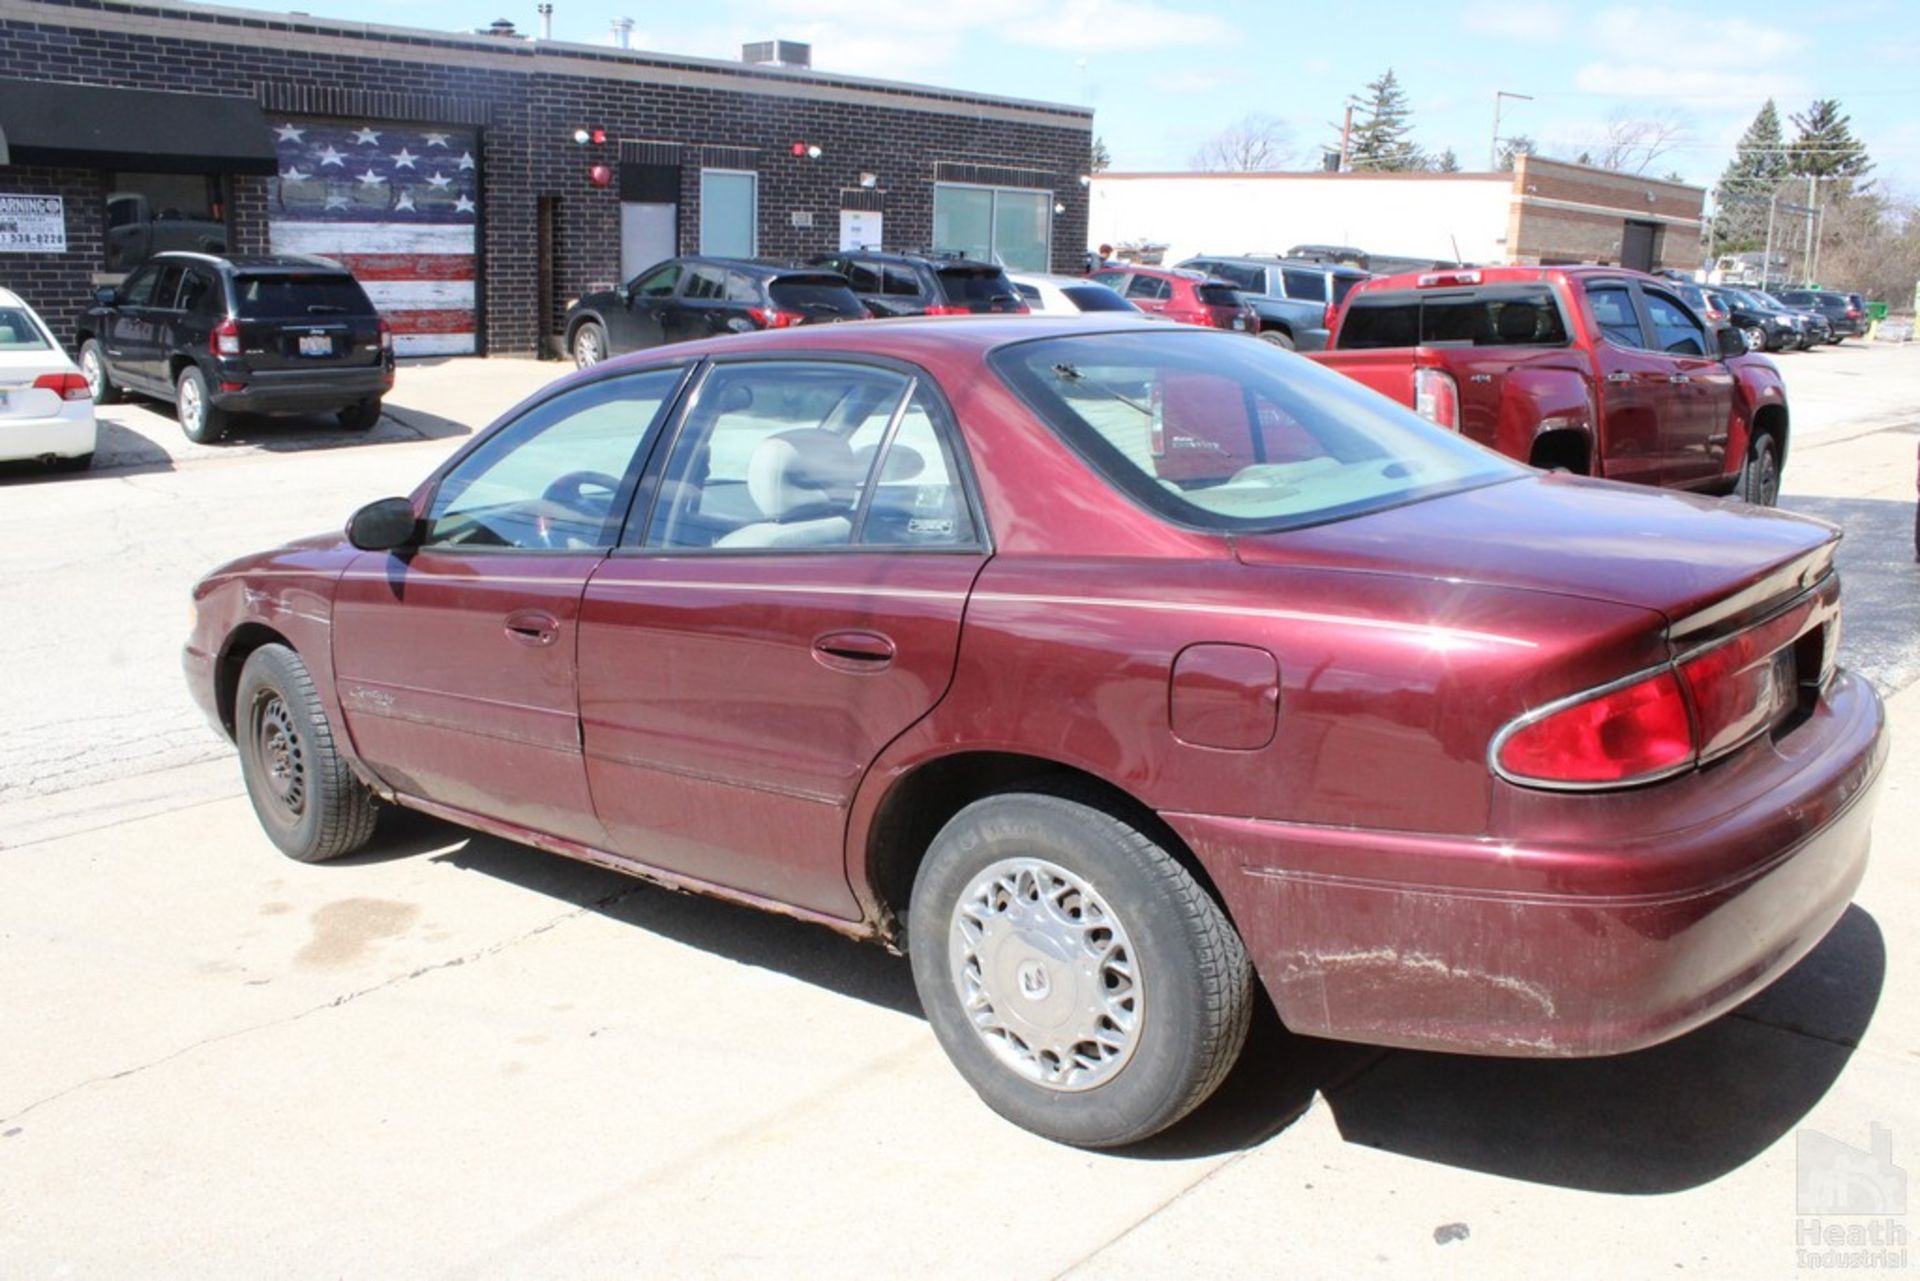 2000 BUICK MODEL CENTURY AUTOMOBILE, VIN: 2G4AS52J511184800, AUTOMATIC TRANSMISSION, CAN'T READ - Image 4 of 7